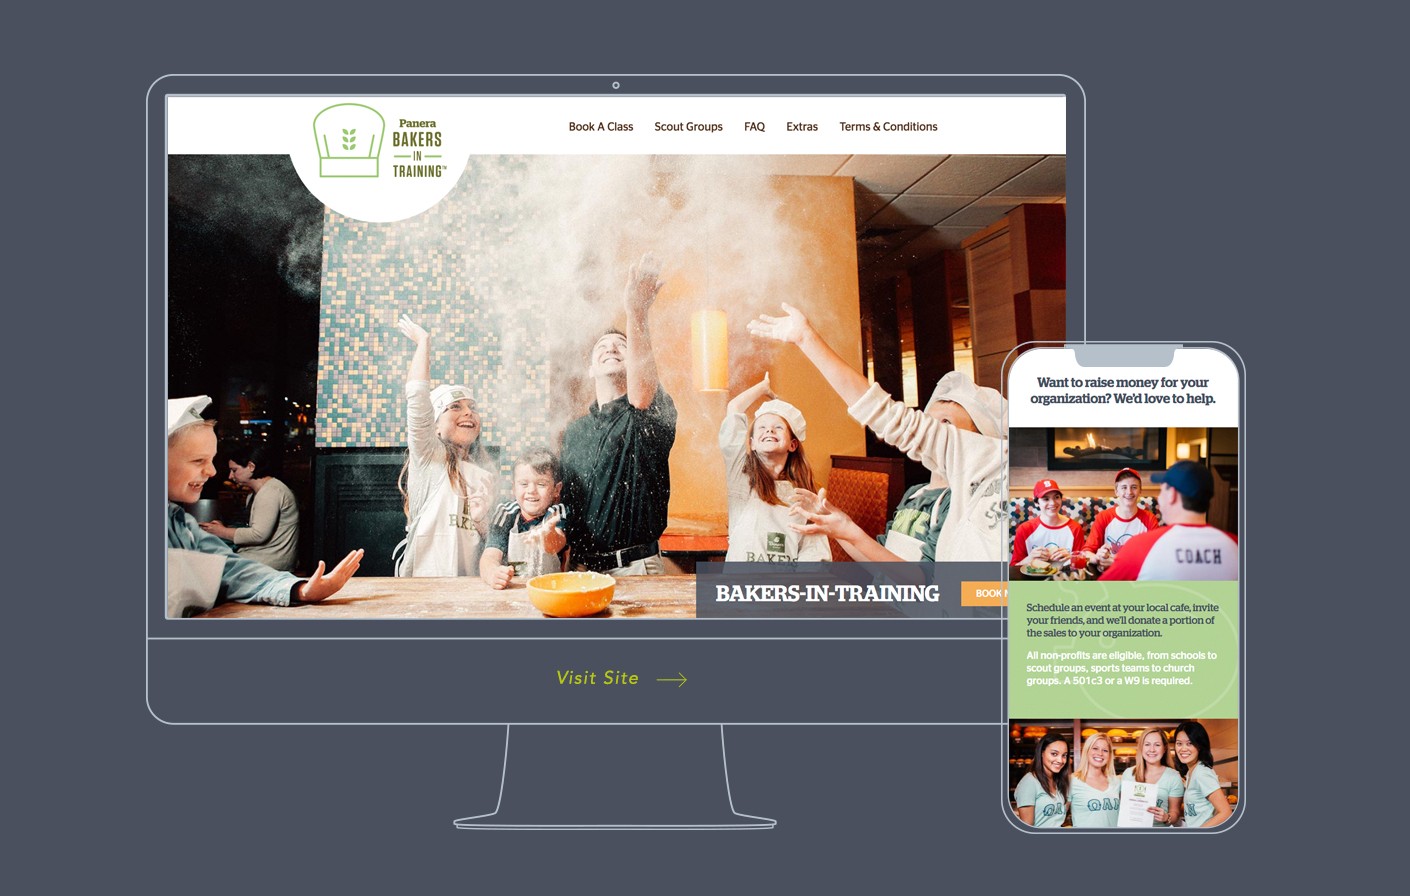 We designed a mobile-responsive landing page to promote Panera Bread Company's Bakers in Training events.